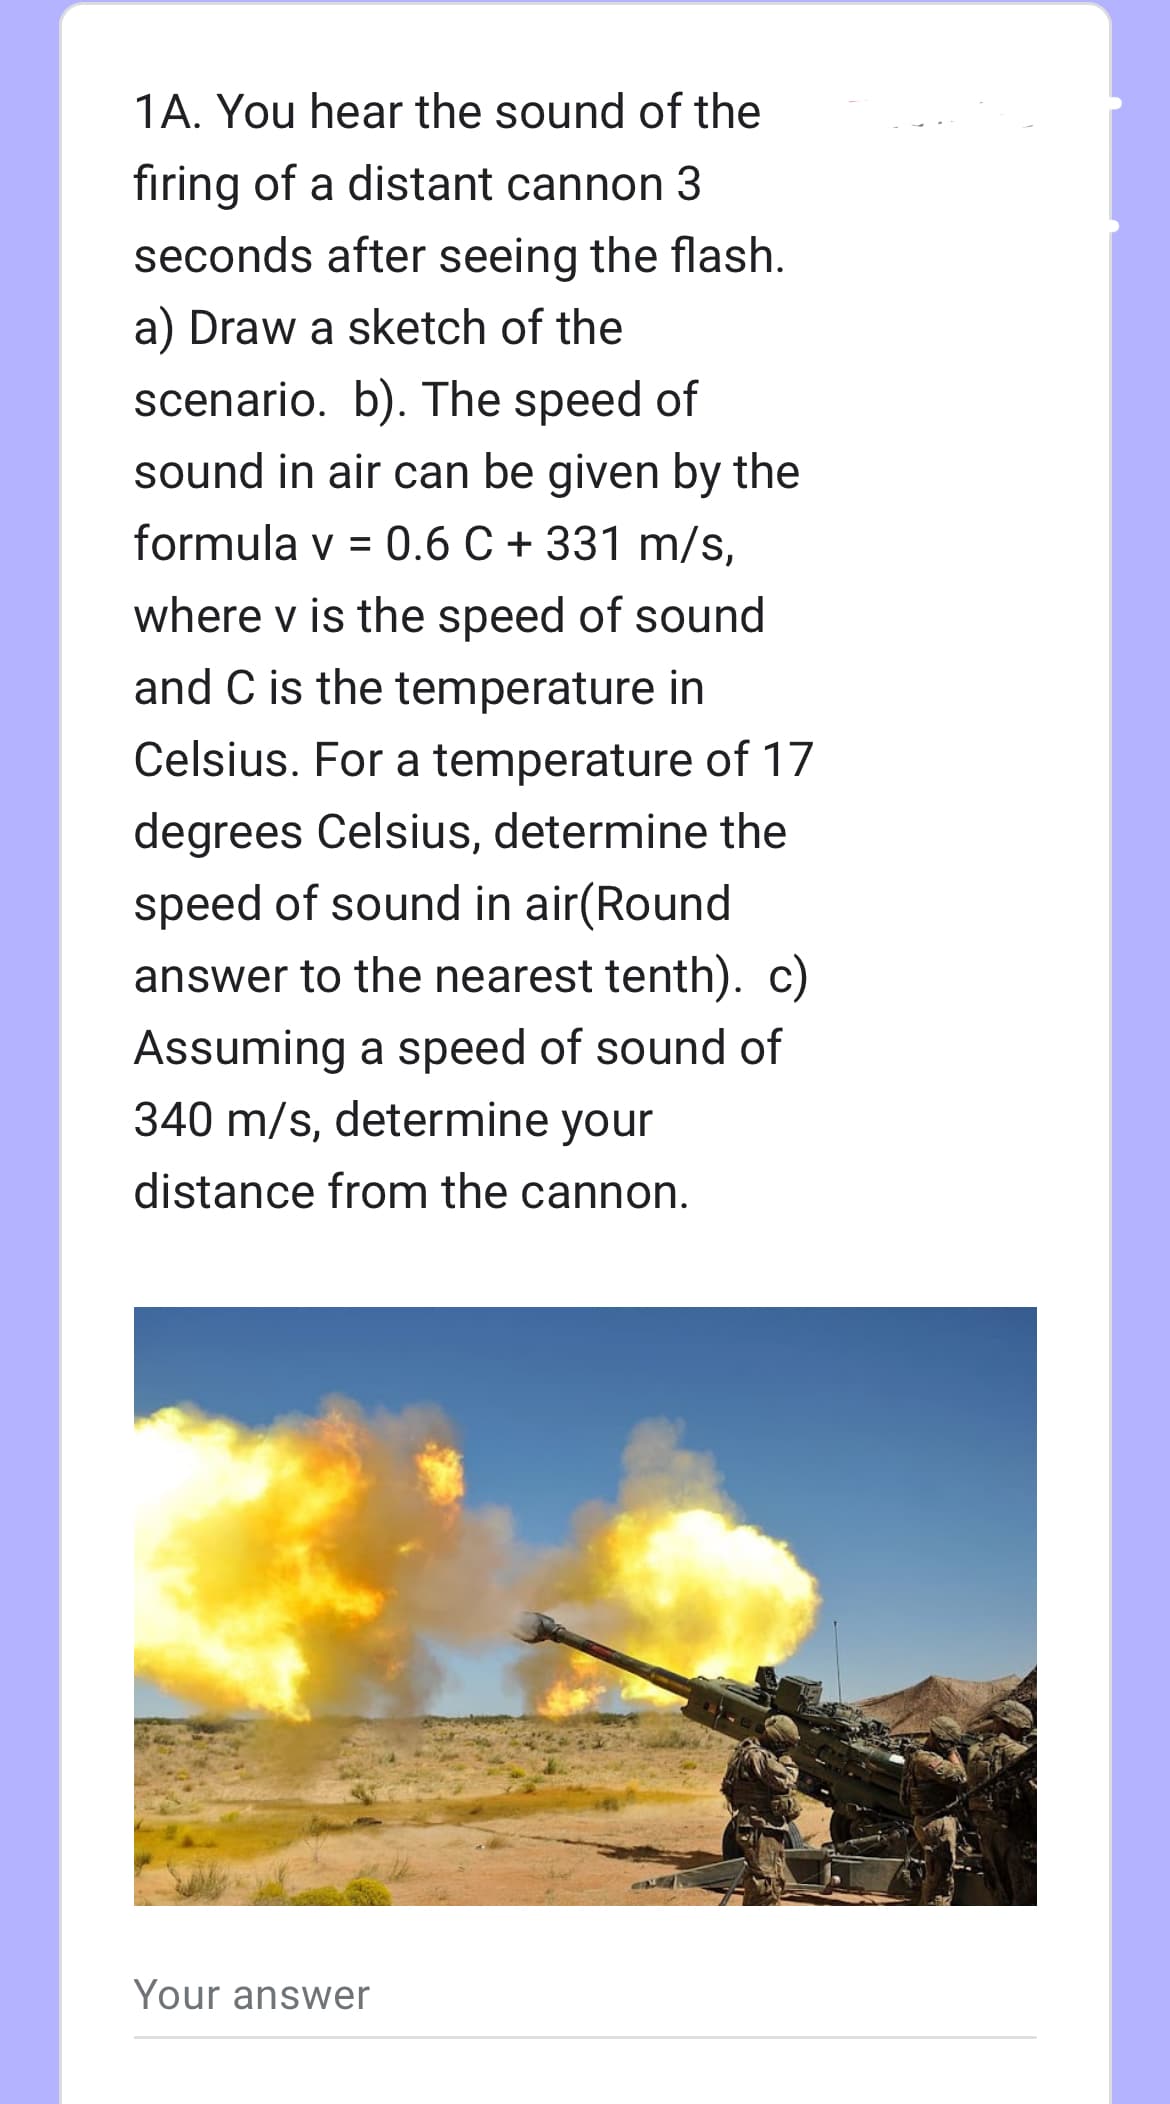 1A. You hear the sound of the
firing of a distant cannon 3
seconds after seeing the flash.
a) Draw a sketch of the
scenario. b). The speed of
sound in air can be given by the
formula v = 0.6 C + 331 m/s,
where v is the speed of sound
and C is the temperature in
Celsius. For a temperature of 17
degrees Celsius, determine the
speed of sound in air(Round
answer to the nearest tenth). c)
Assuming a speed of sound of
340 m/s, determine your
distance from the cannon.
Your answer